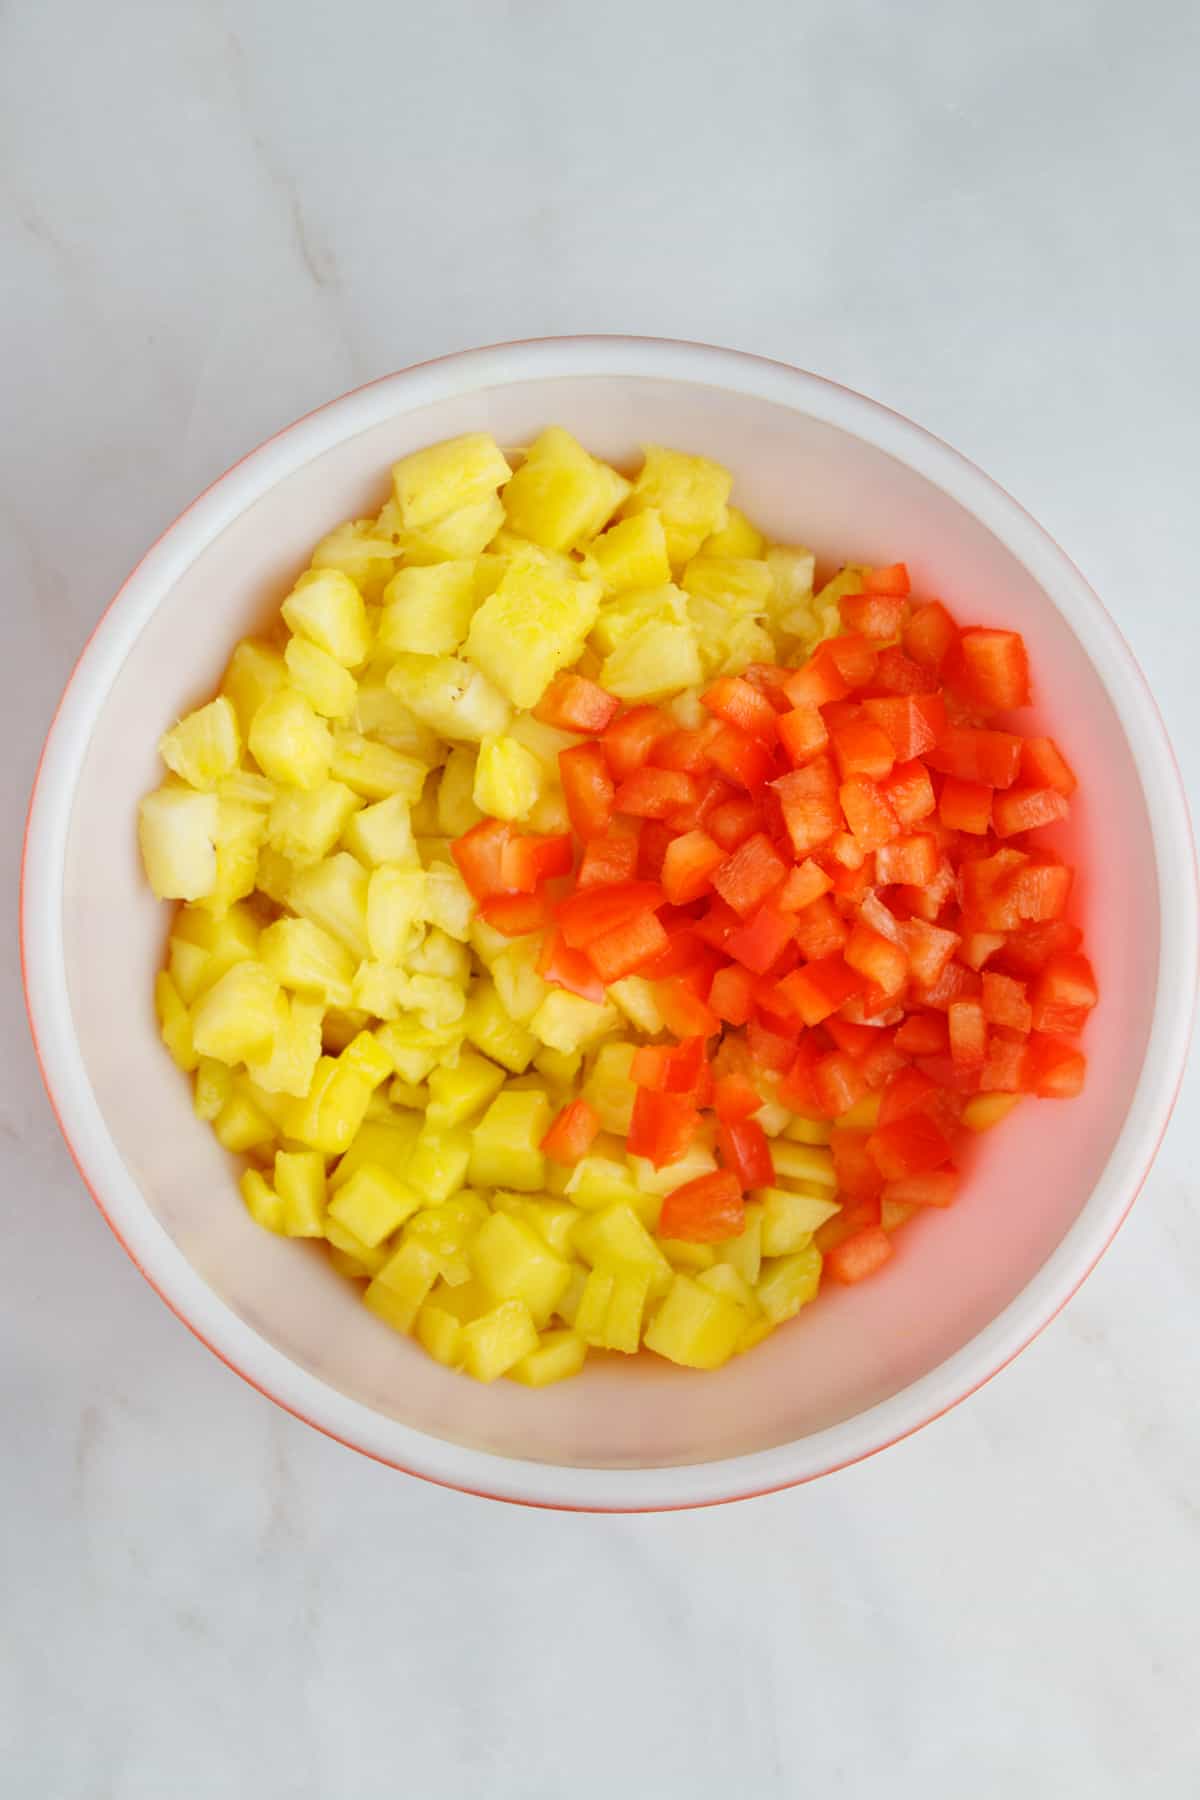 Fresh mangos, pineapples and diced red bell pepper in a bowl.